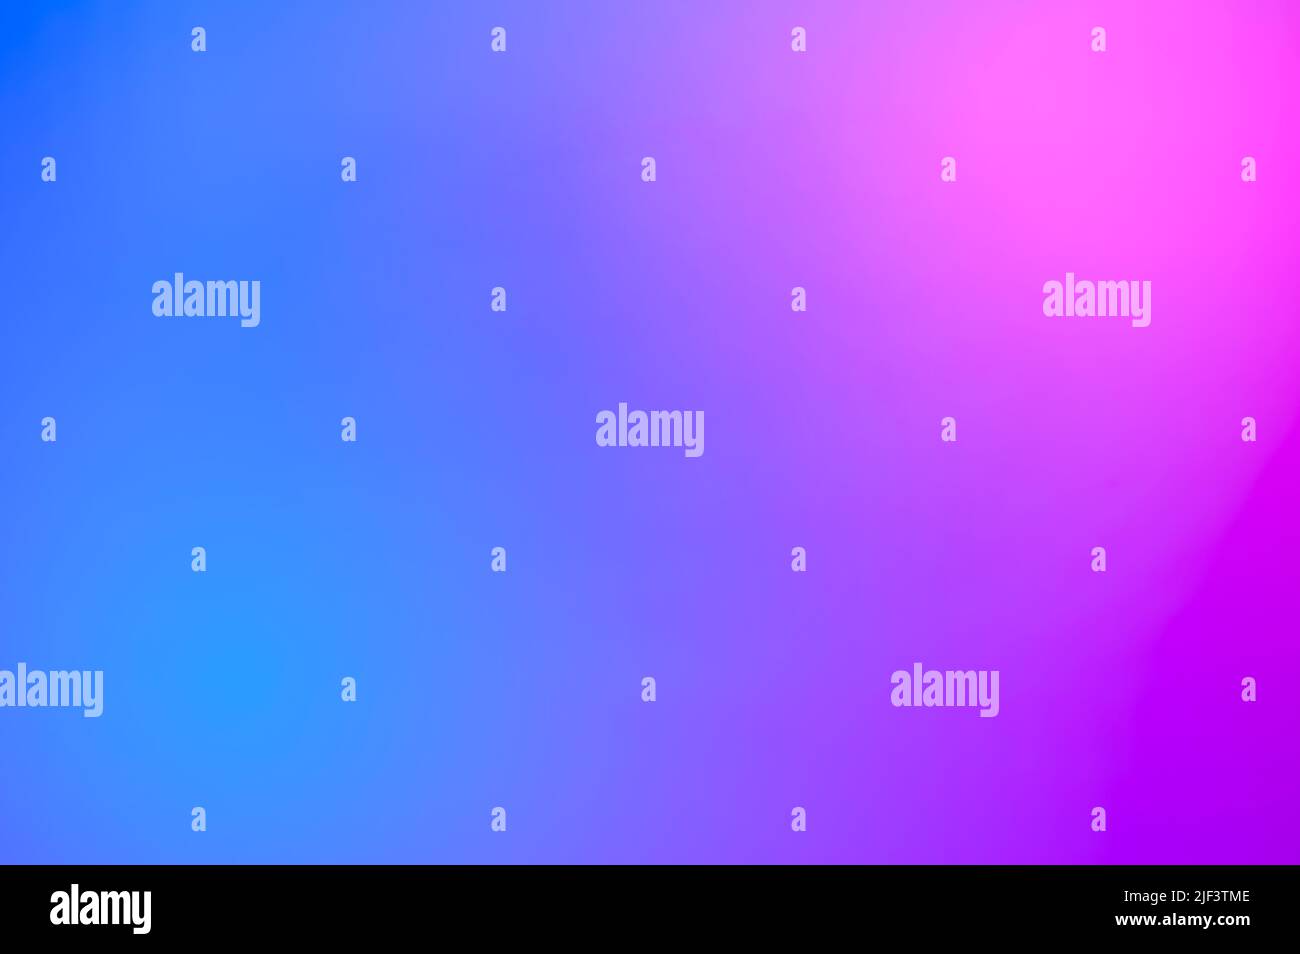 Gradient colorful blue pink modern abstract background. Gradation blurred with modern. For the presentation background. Stock Photo